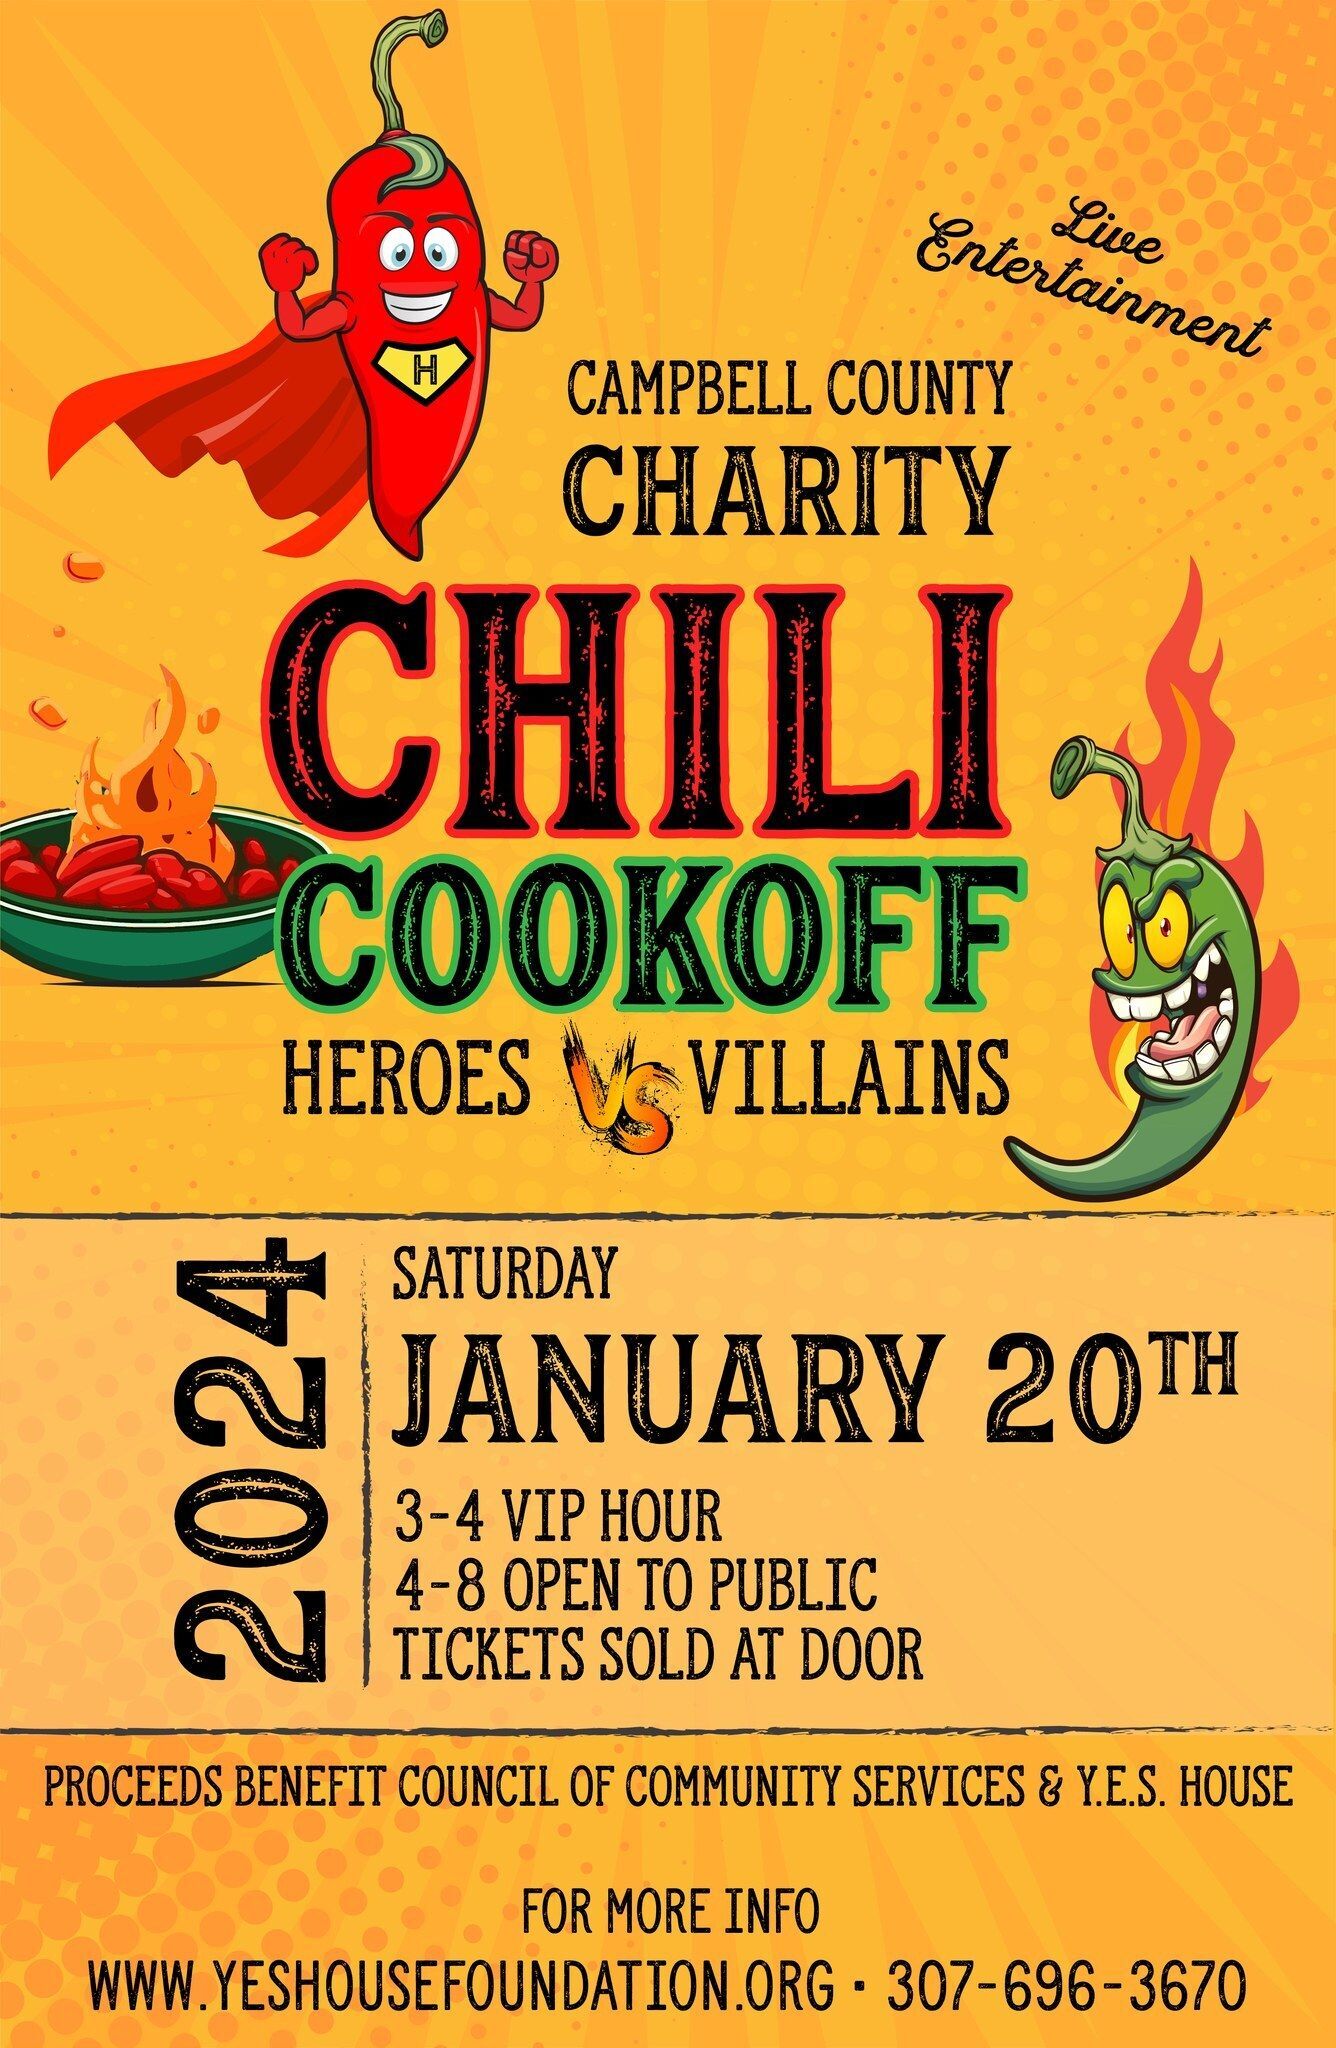 Calling All Chili Champions: It's Time to Spice Up Campbell County!